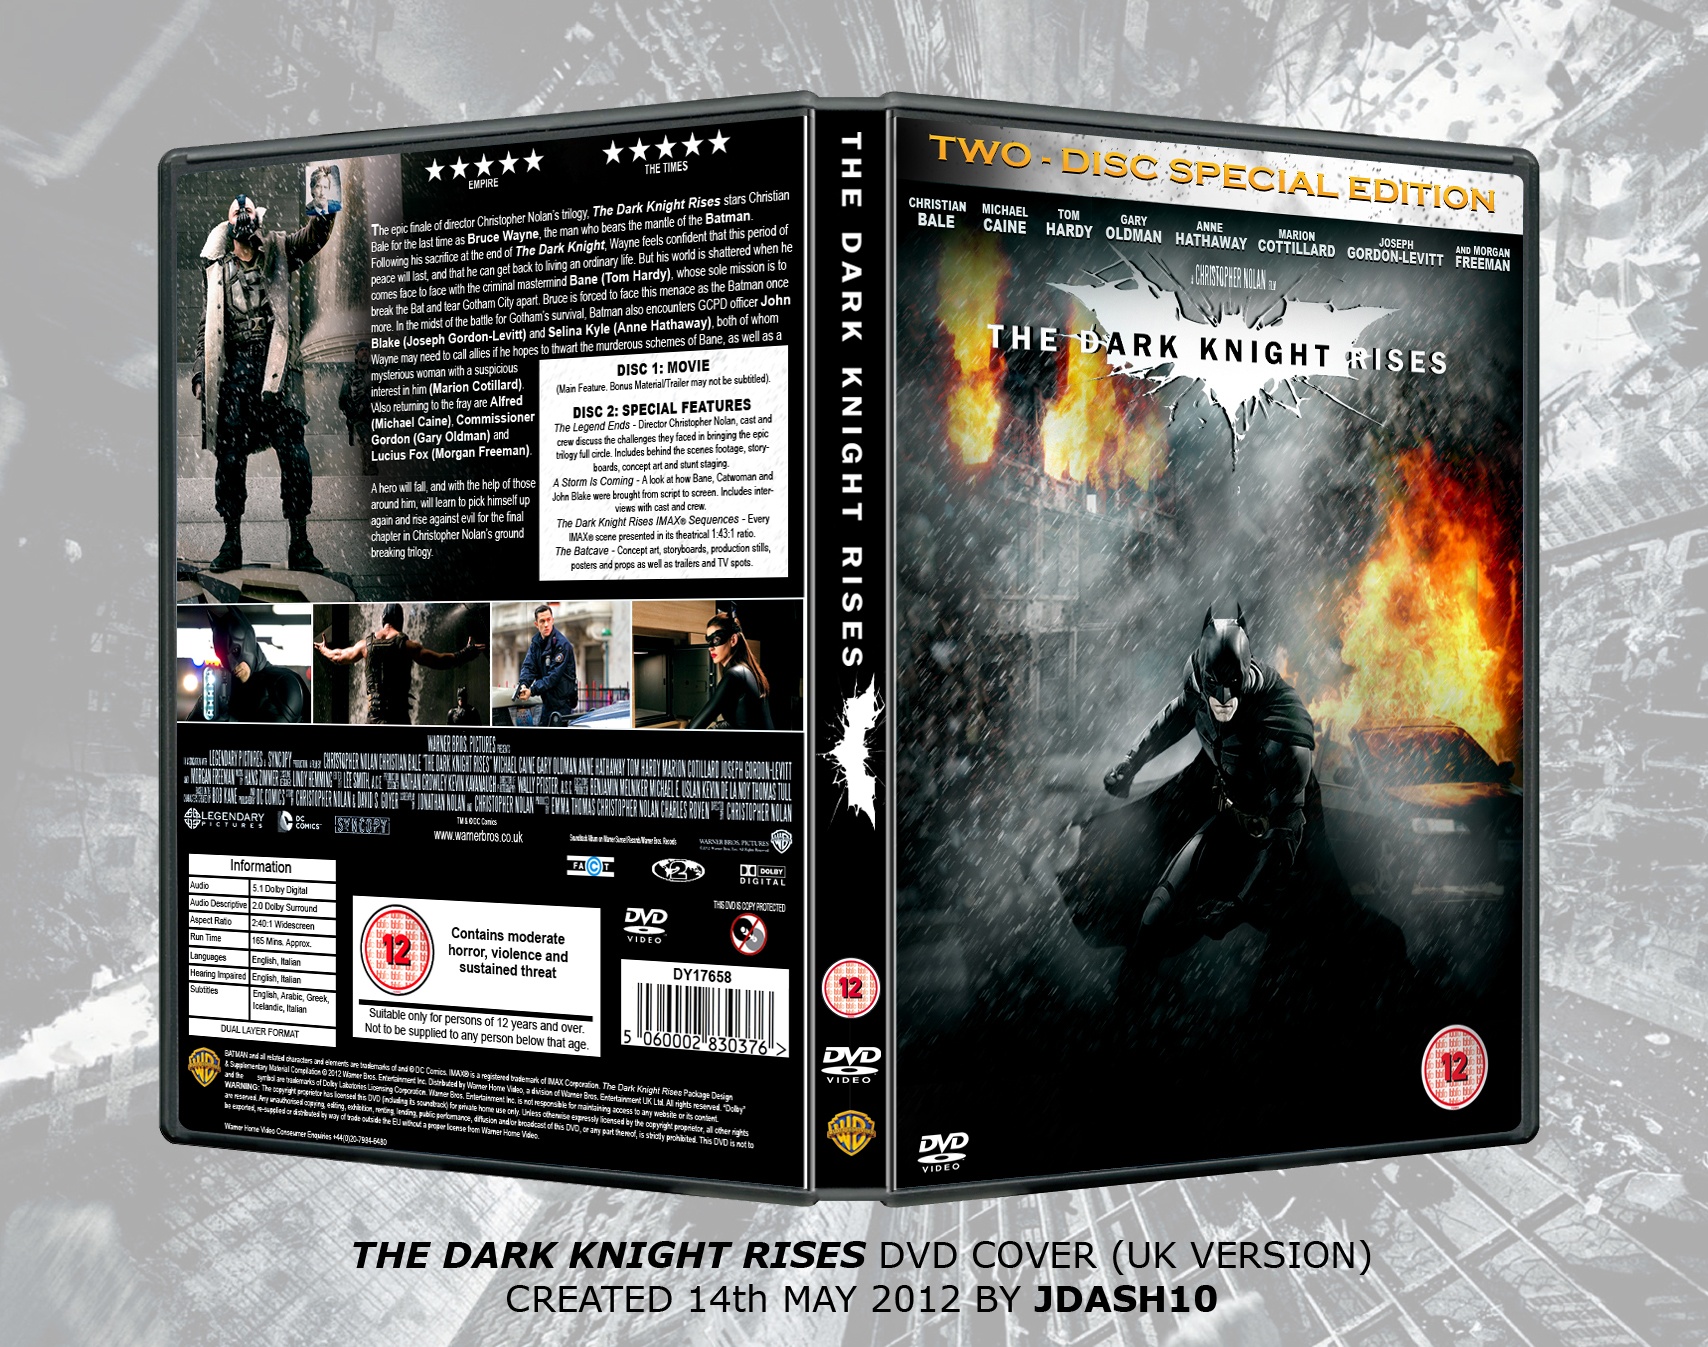 The Dark Knight Rises: 2-Disc Special Edition box cover